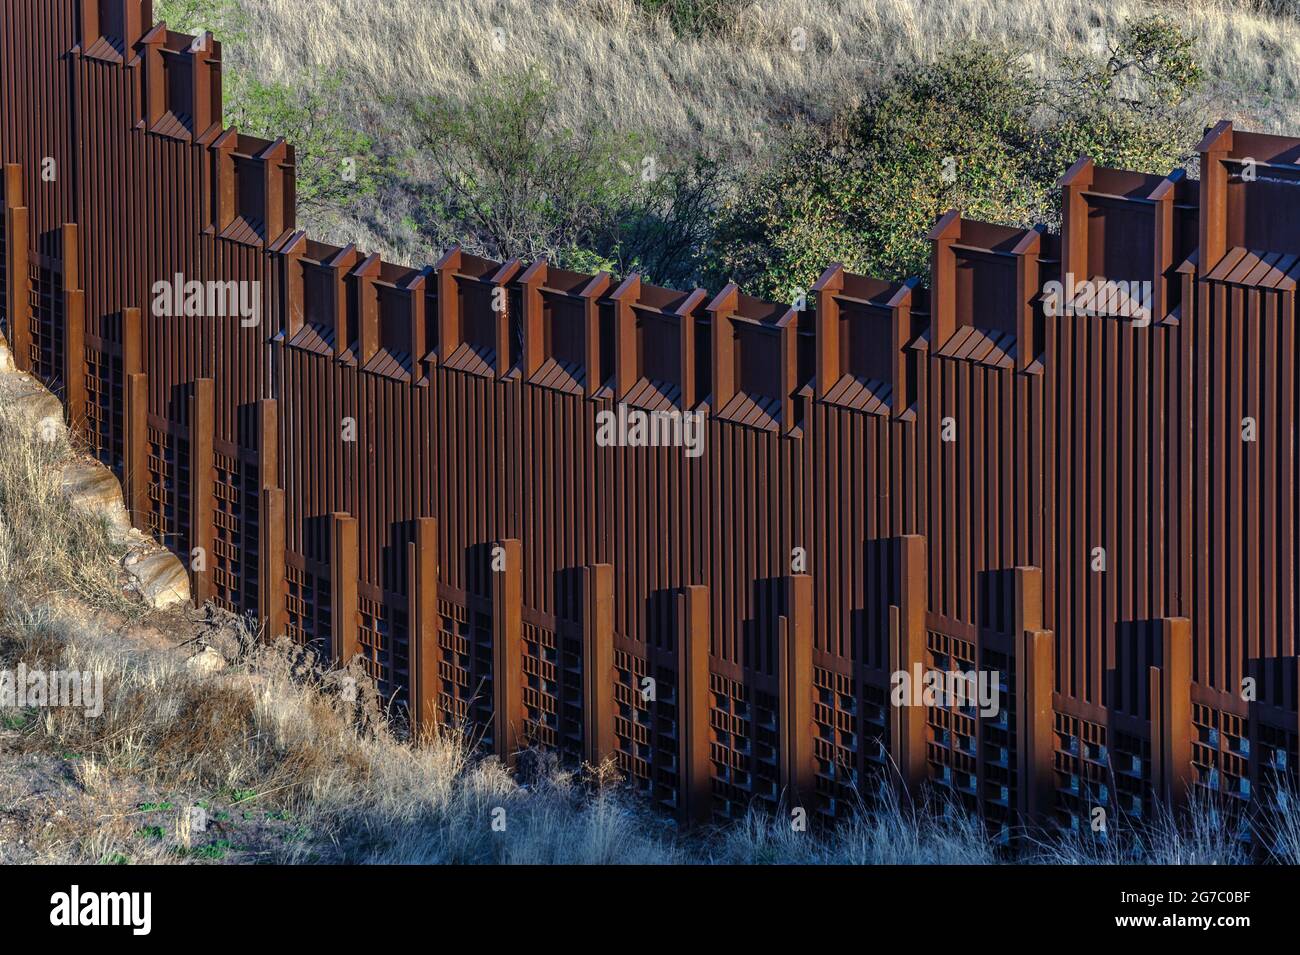 Detail view of US border fence on the Mexico border, east of Nogales Arizona USA, and Nogales Sonora Mexico, viewed from US side. Note the design for Stock Photo